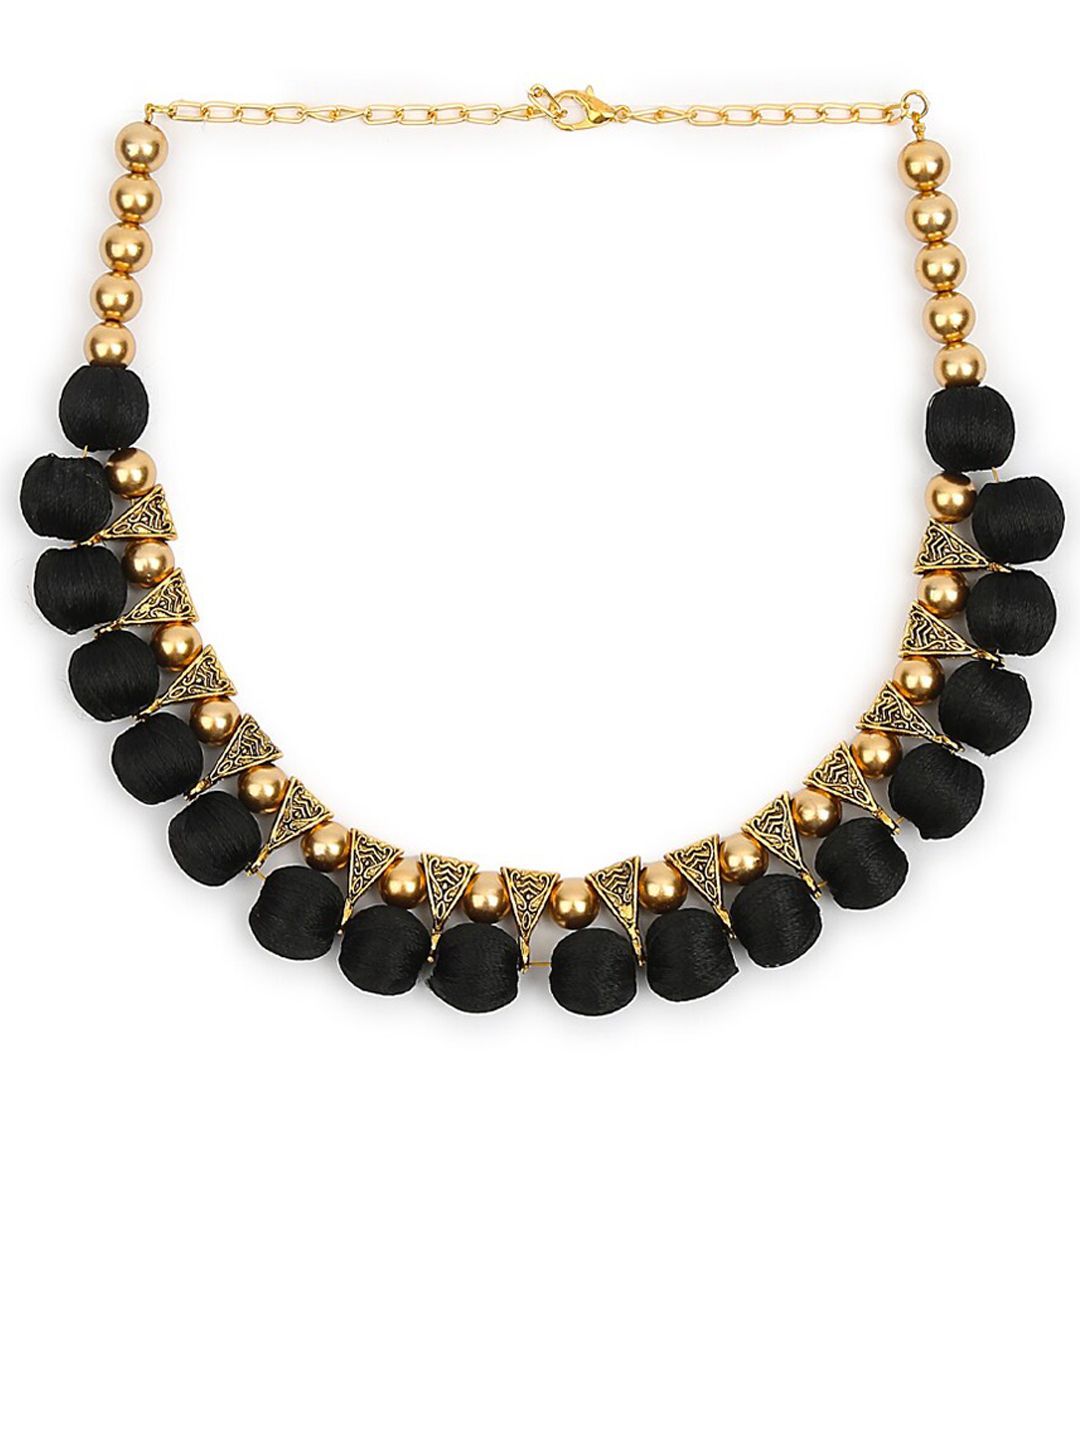 AKSHARA Gold-Plated Black Beaded Handcrafted Choker Necklace Price in India